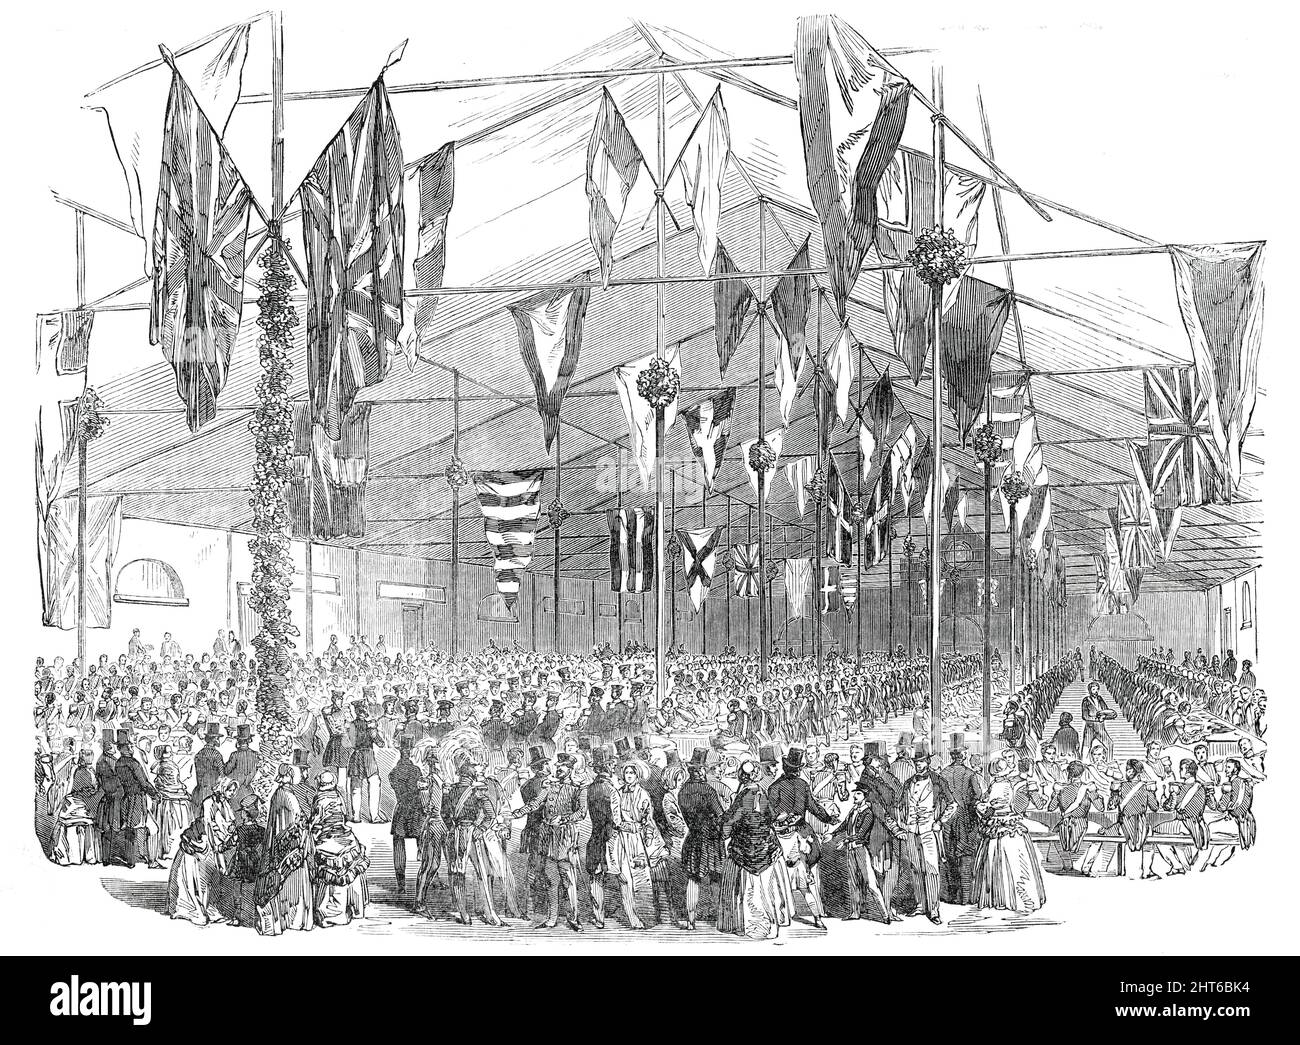 Entertainment to the Non-Commissioned Officers and Privates of the Coldstream Guards, at the Portman-Street Barracks, 1850. British soldiers and their families at an event in London '...to celebrate the two hundredth anniversary of the enrolment of that distinguished corps by the gallant and celebrated General Monck...The men having sat down, grace was said by Sergeant-Major Hurle, who presided. His Royal Highness the Duke of Cambridge occupied a seat amongst the privates. The fare consisted of about 1400 lb. of beef, with a liberal supply of pudding and beer...The Sergeant, in eloquent terms, Stock Photo